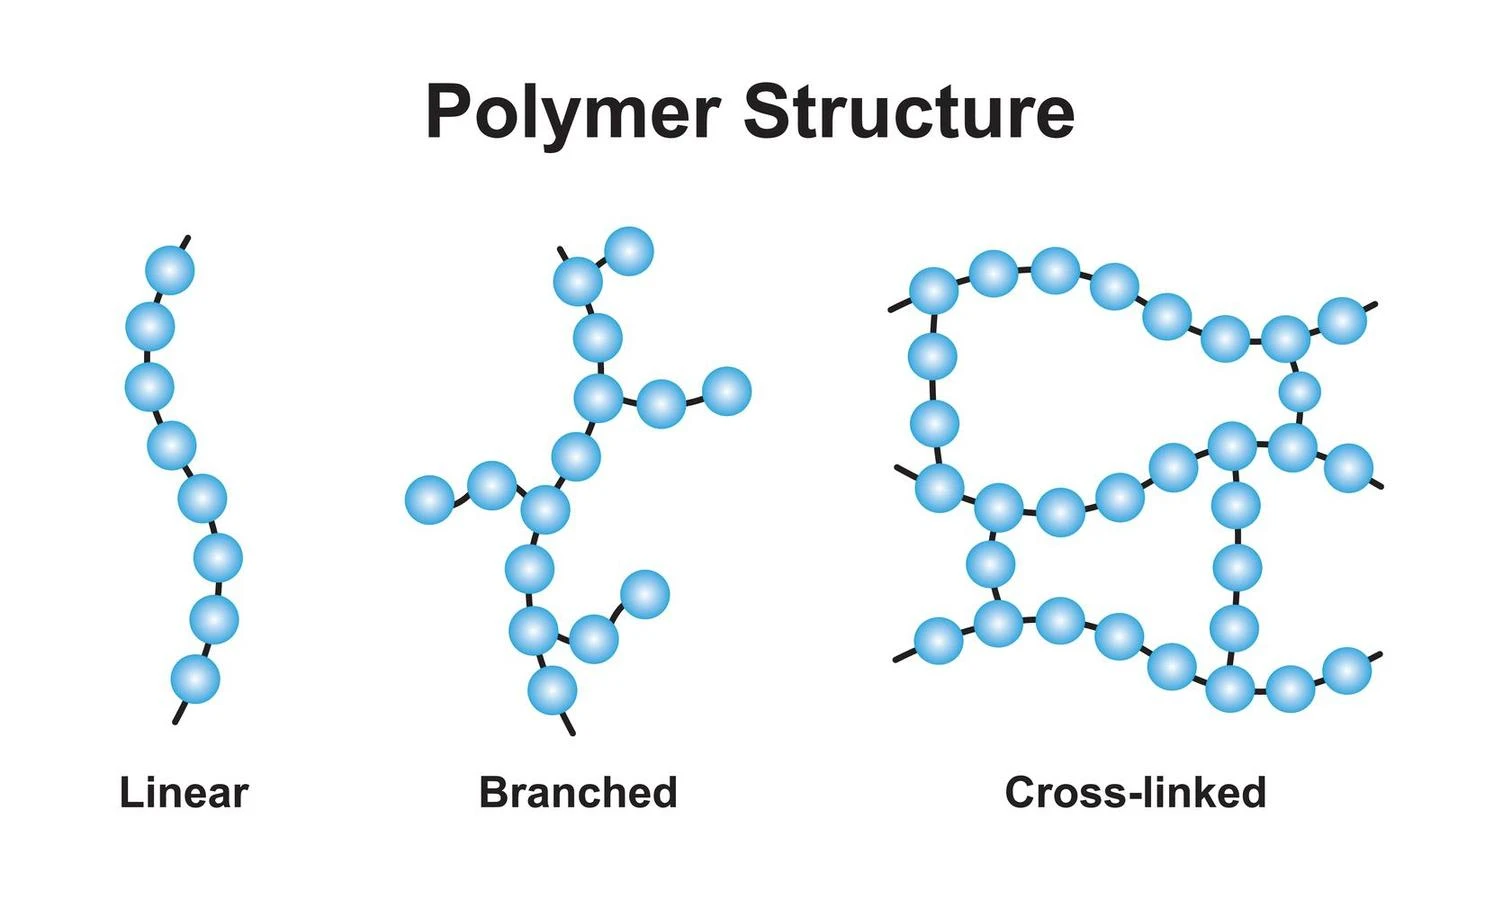 linear or branched chain monomers are joined by cross-linking to form thermosetting polymers.